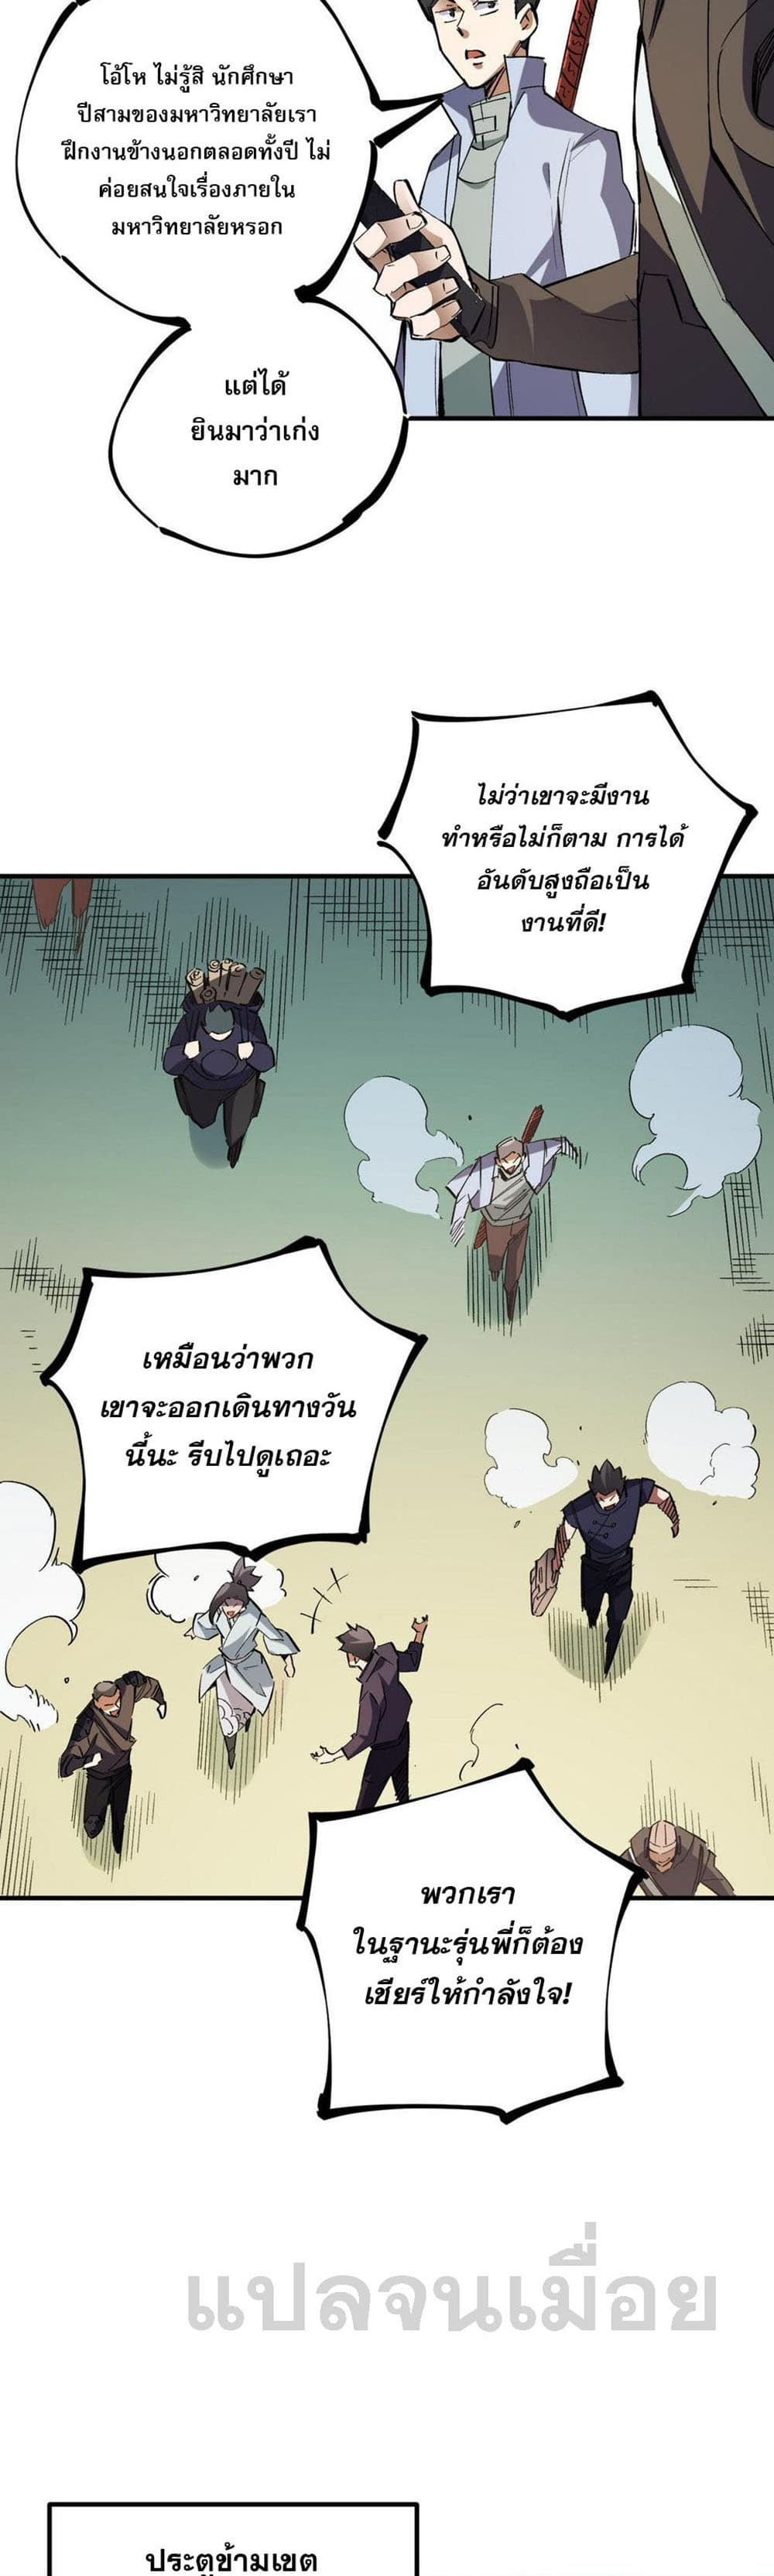 Job Changing for the Entire Population: The Jobless Me Will Terminate the Gods ฉันคือผู้เล่นไร้อาชีพที่สังหารเหล่าเทพ 27-27